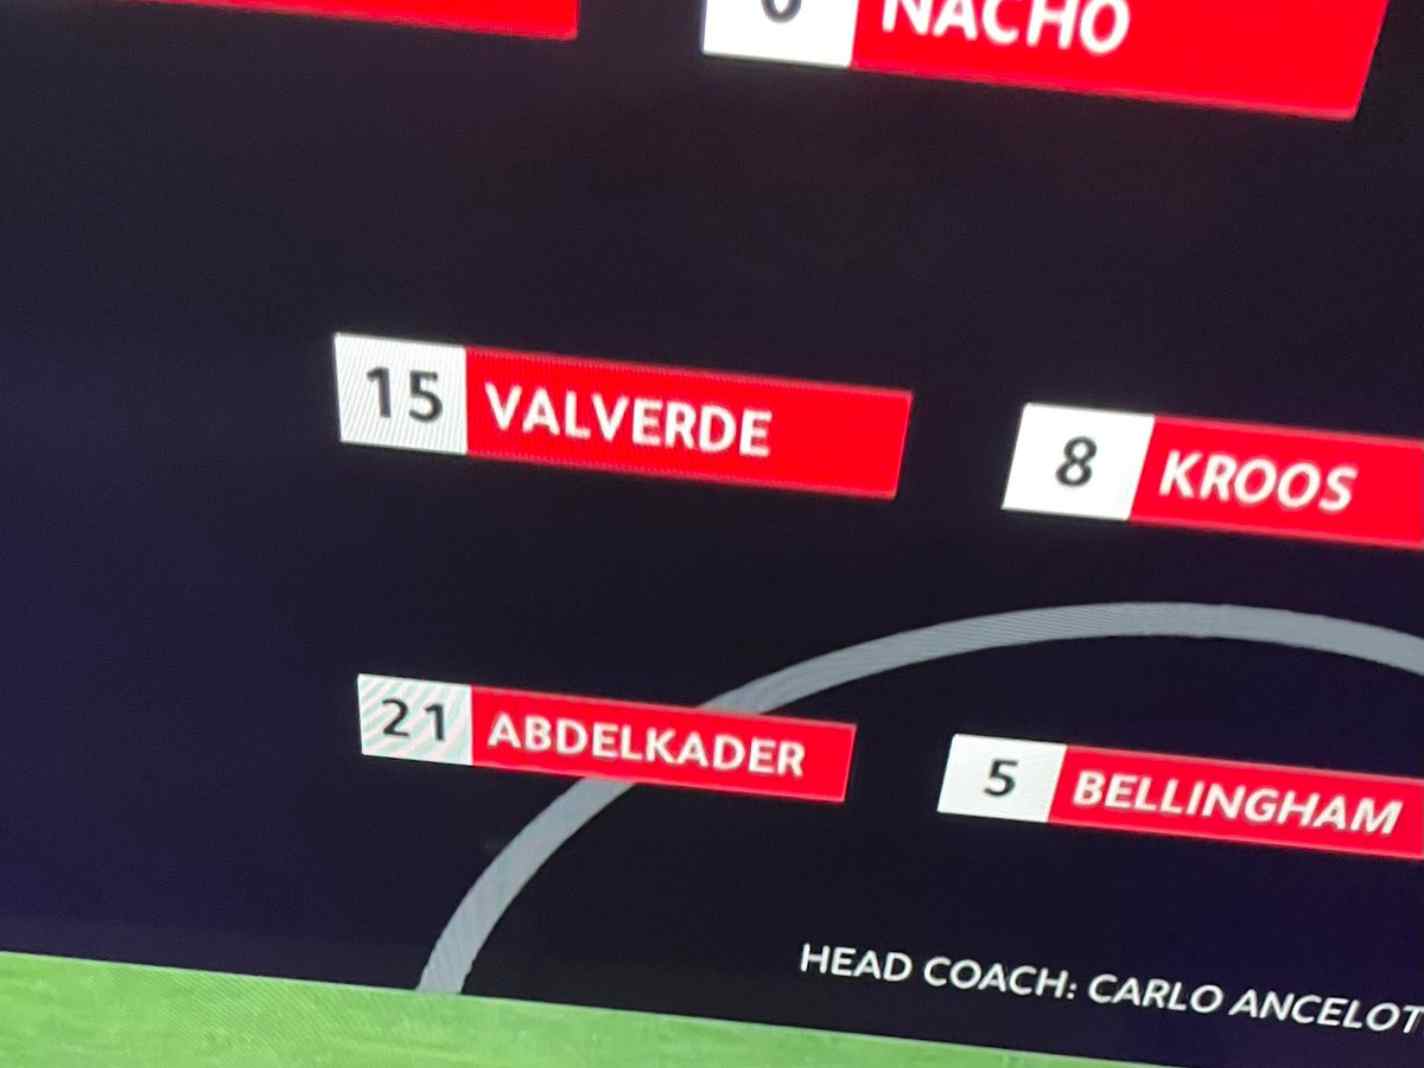 Who Are Abdelkader and Paixao? Fans Stumped By Unknown Players in Real Madrid Lineup